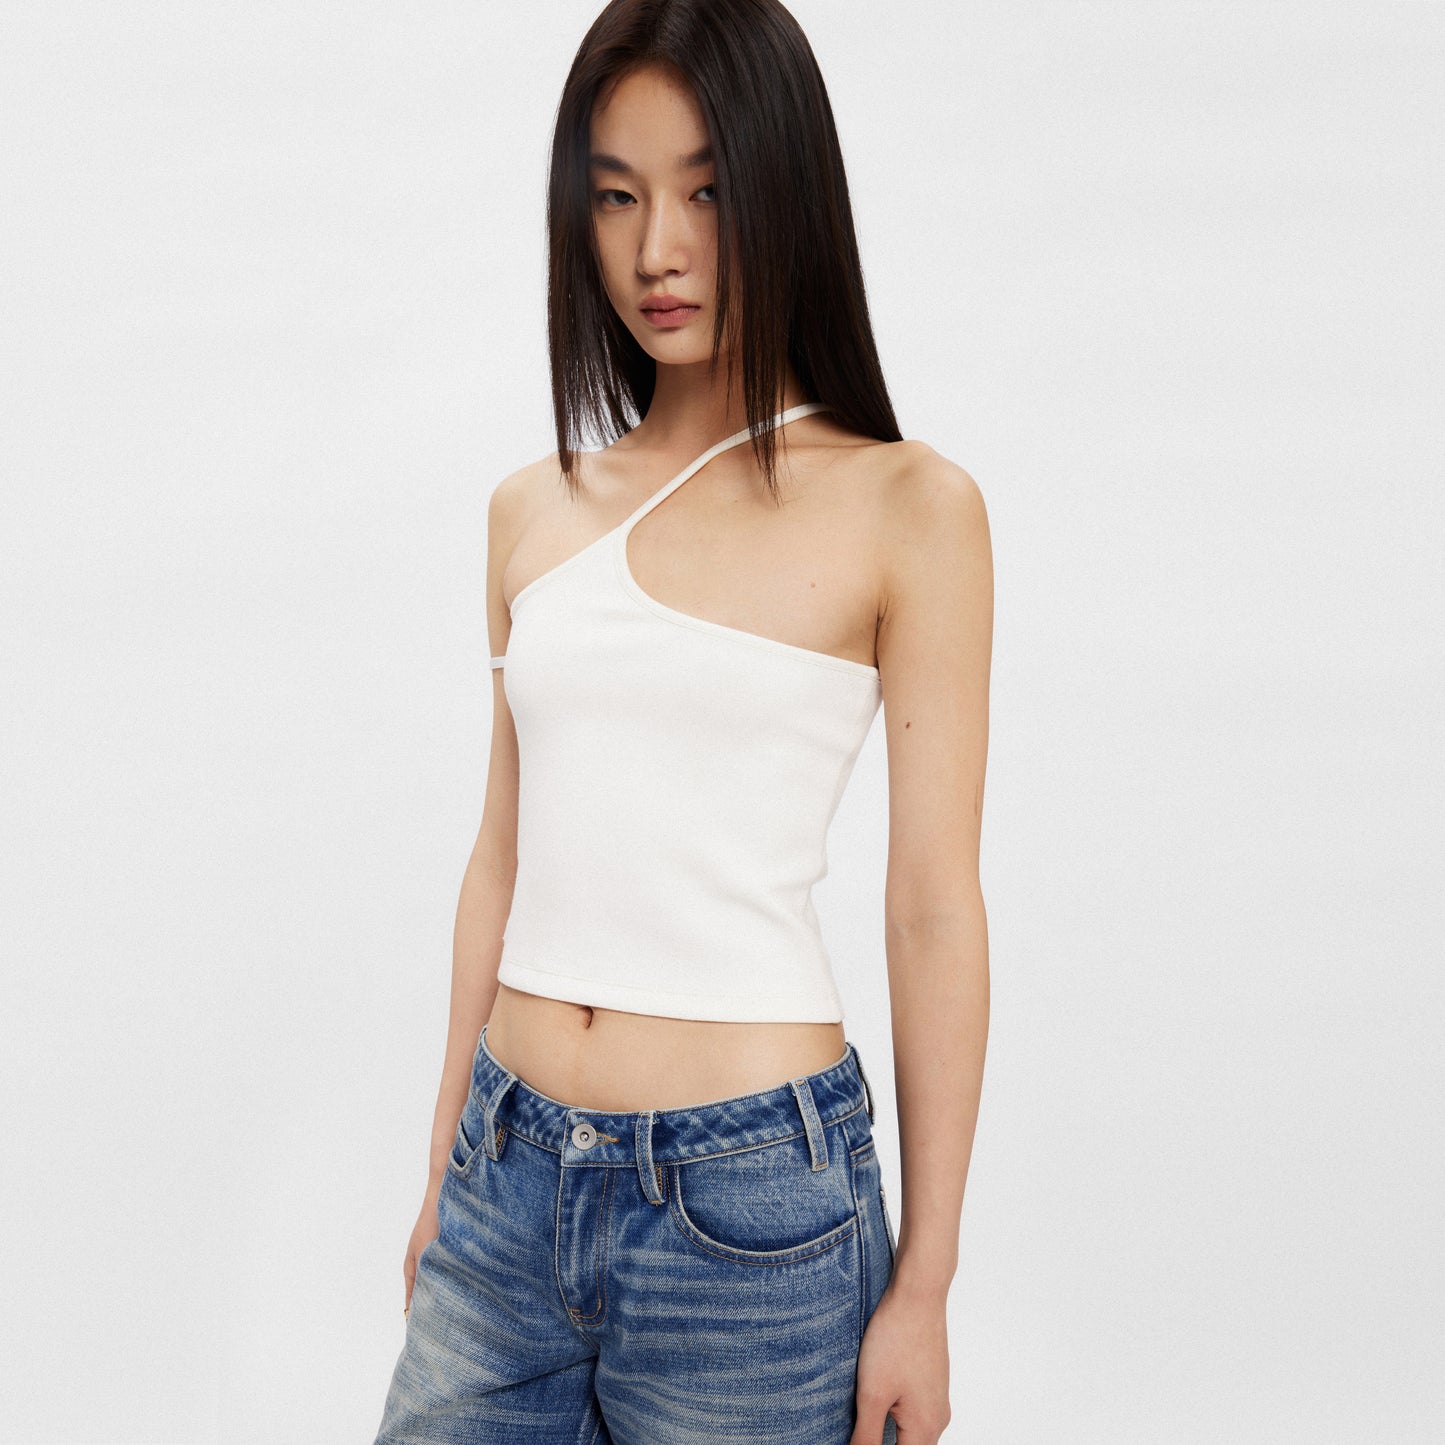 The Asymmetrical Fitted Cami Top